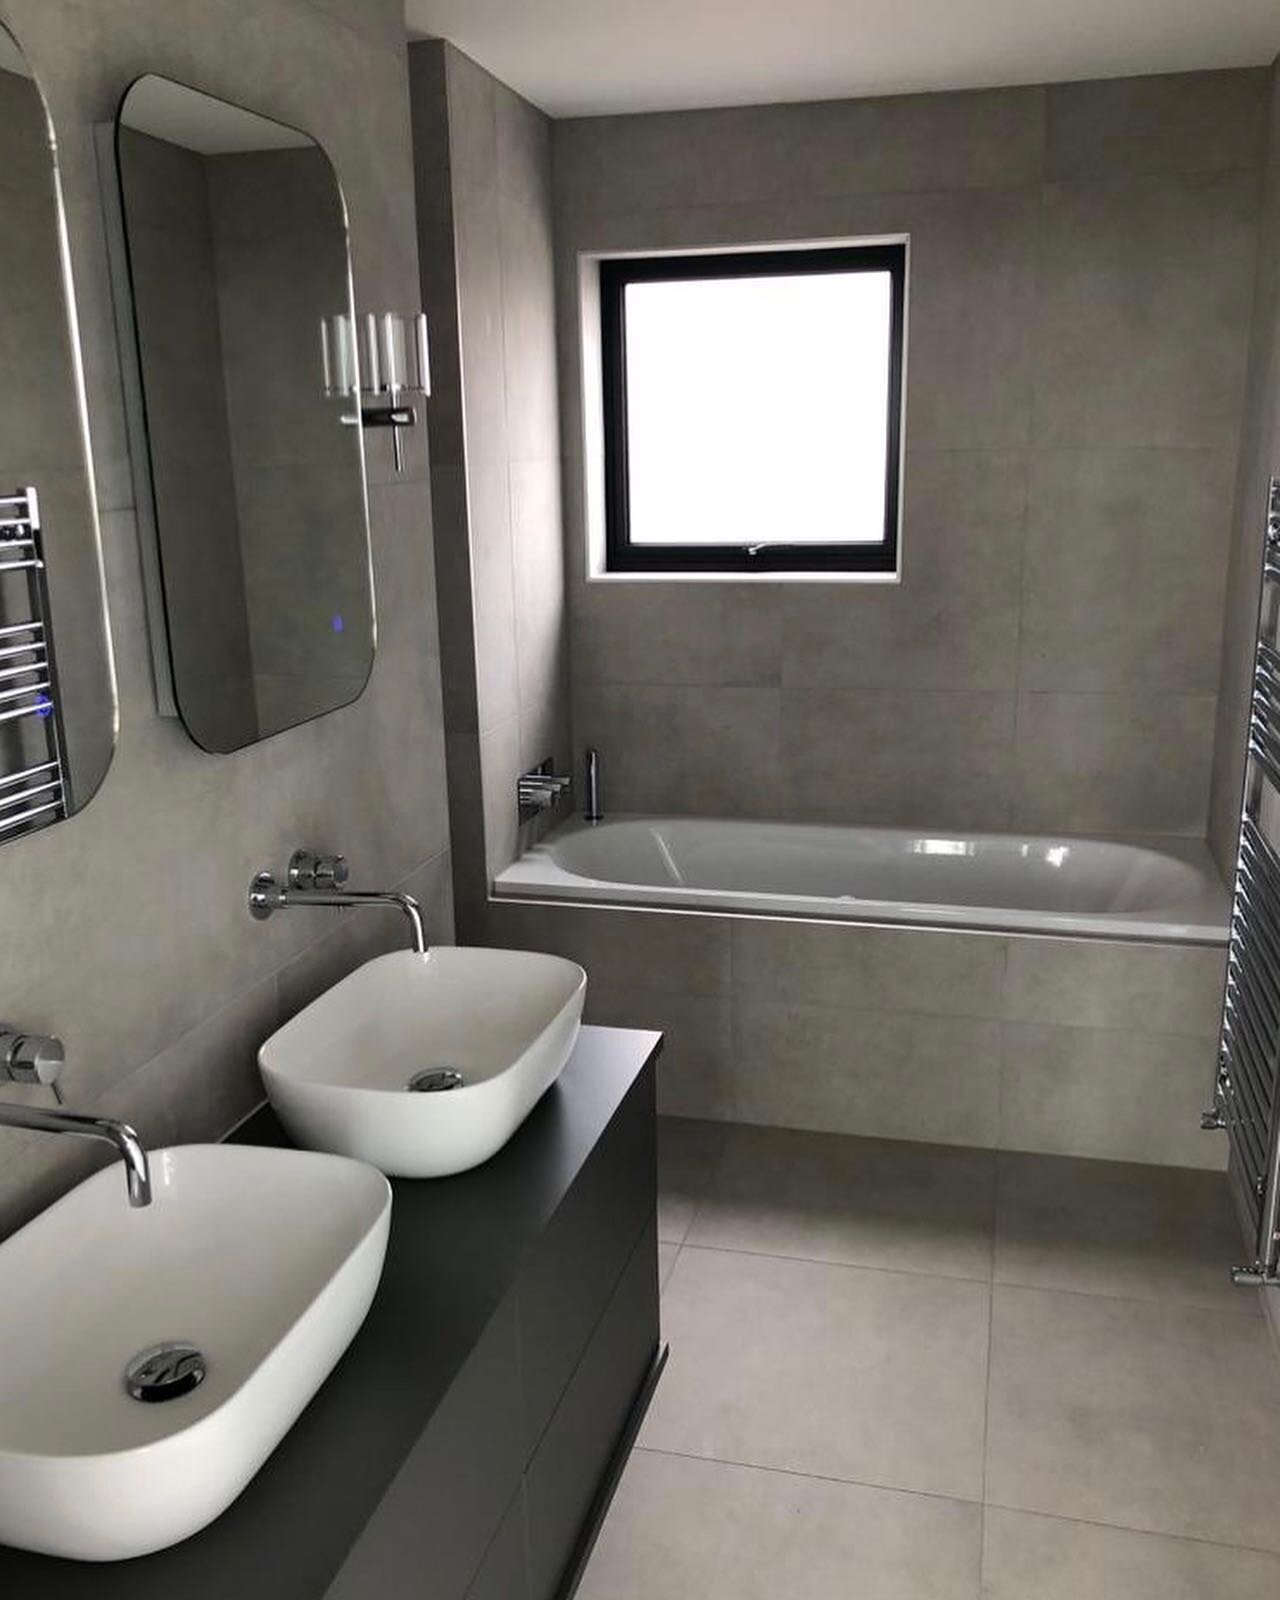 Completed bathrooms on site using porcelain tiles supplied by @bocchettaceramica 
.
.
.
.
.
.
.
#tiles #tiling #tilingwork #bathroomdesign #bathroomdecor #tile #tiledesign #shower #bath #wall #floor #interiordesign #interior #interiorarchitecture #in